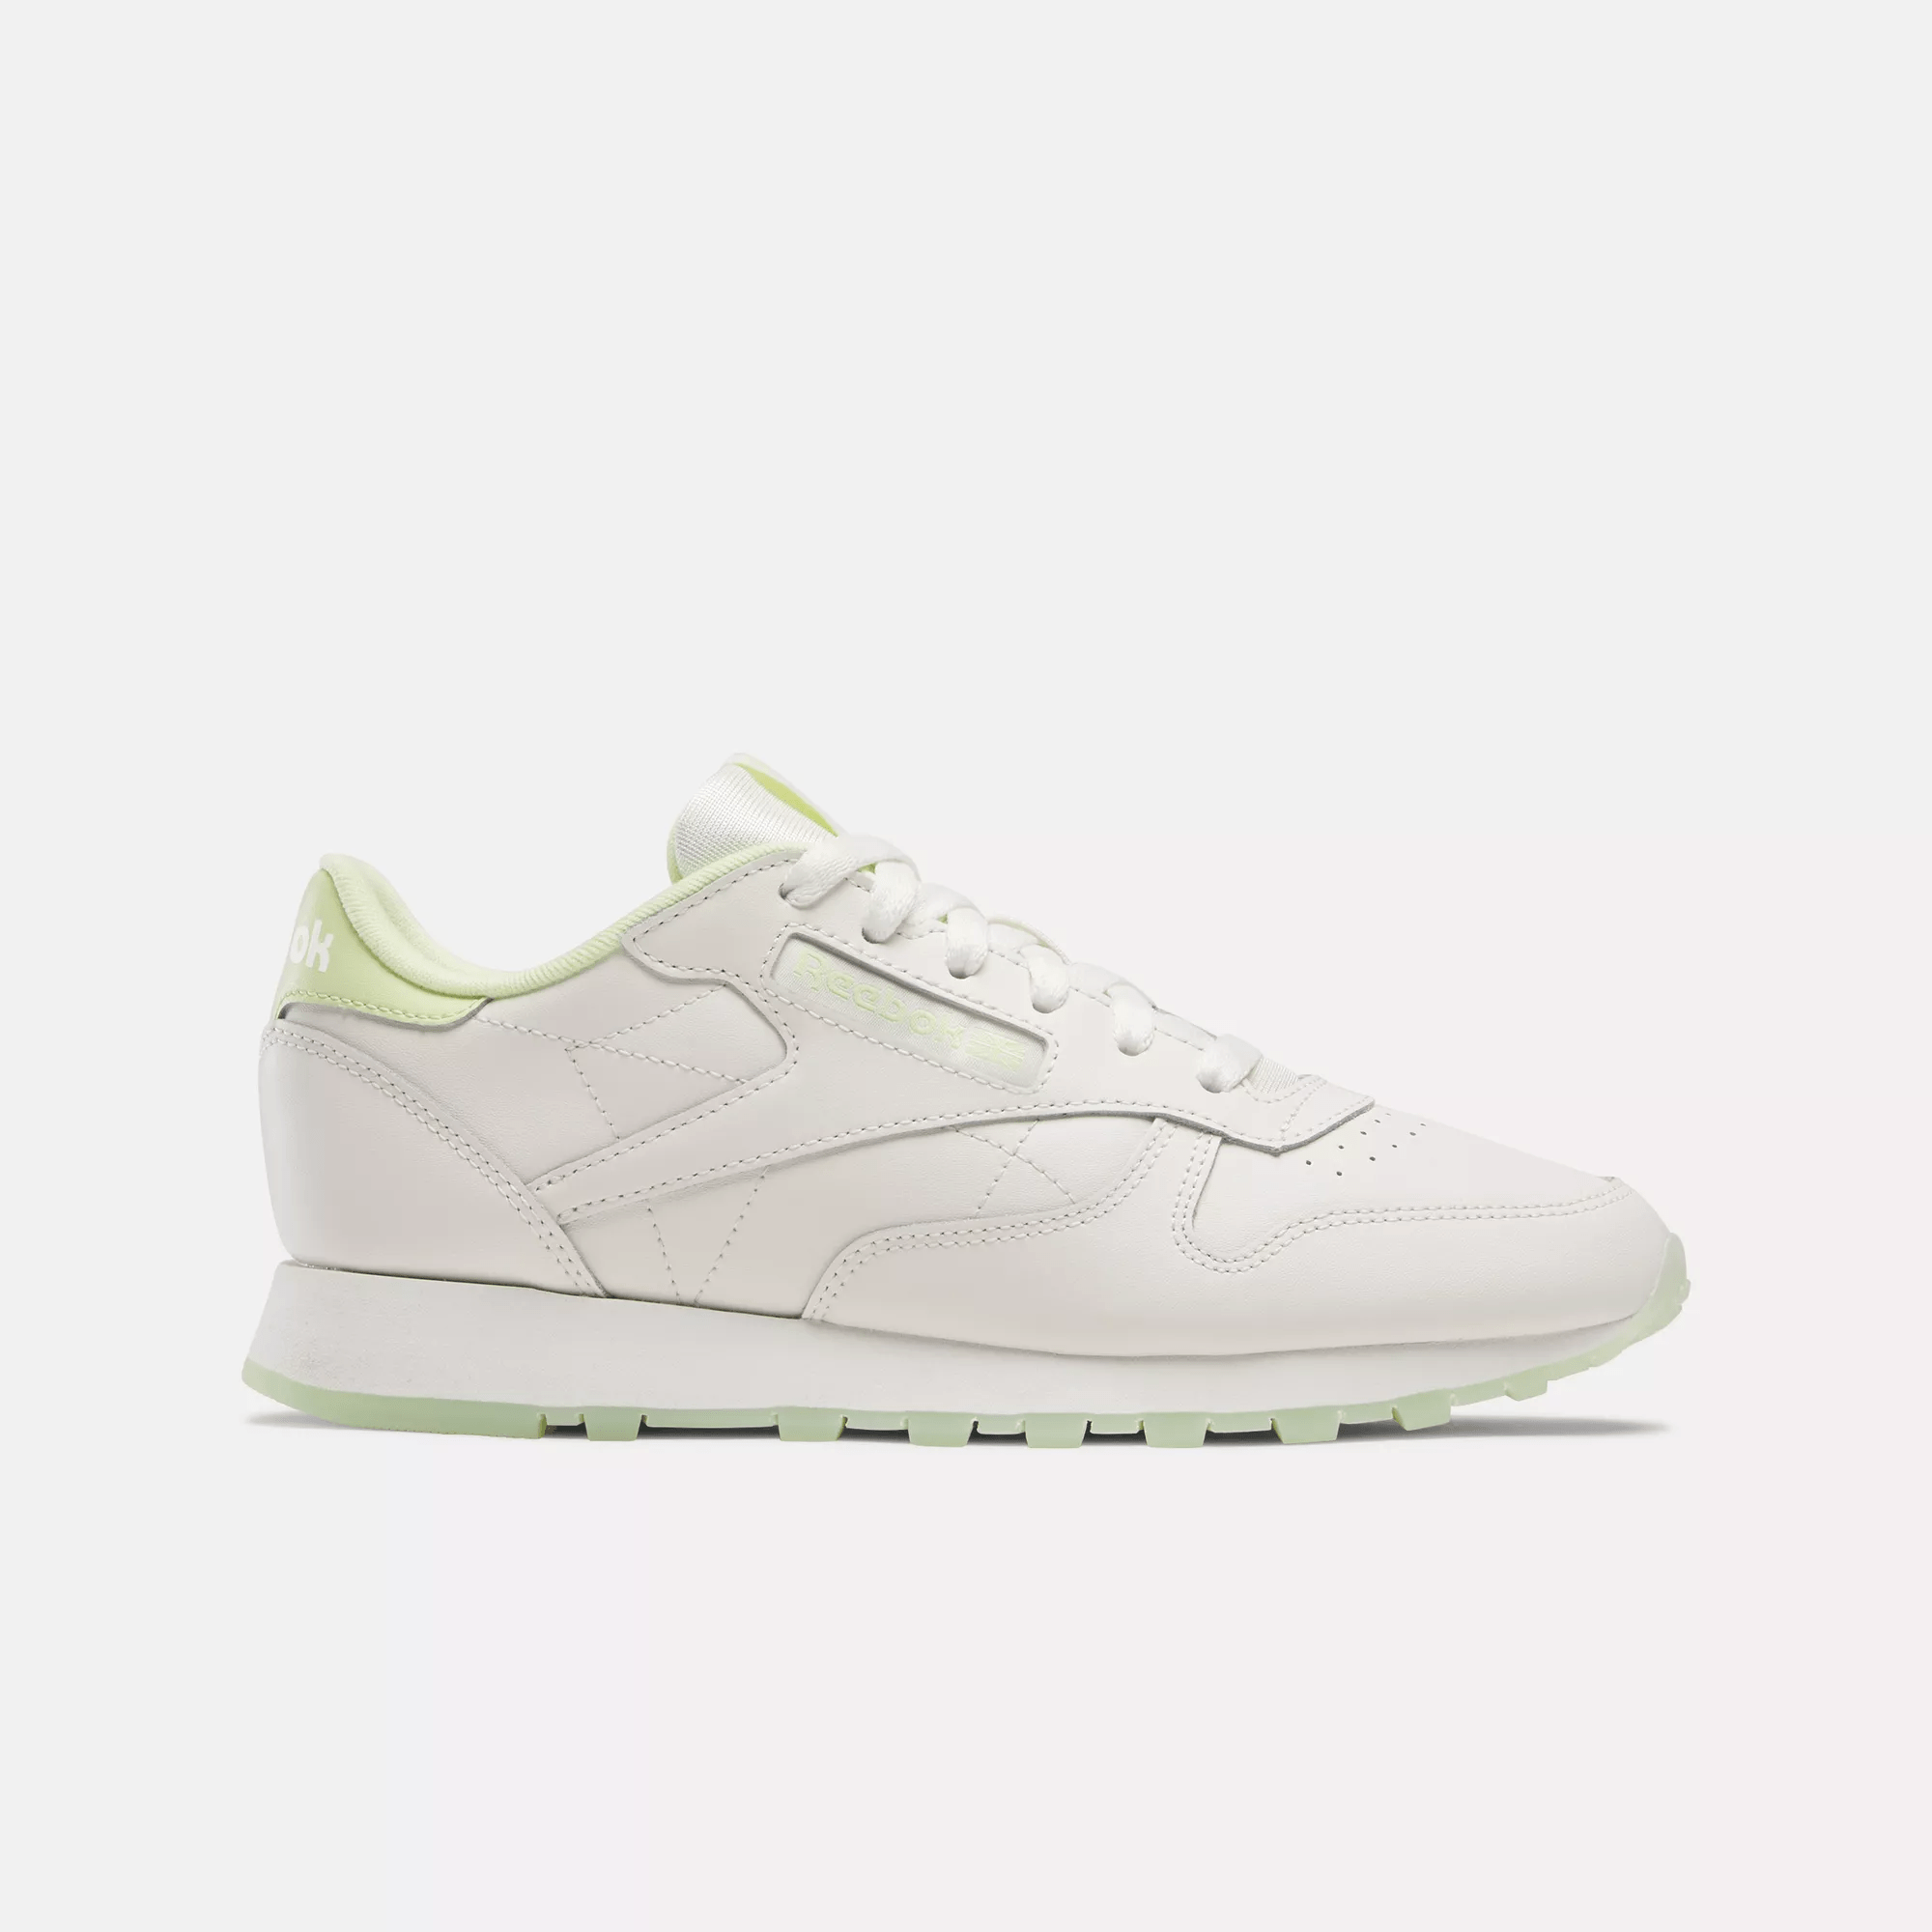 Reebok Classic Leather Shoes In White